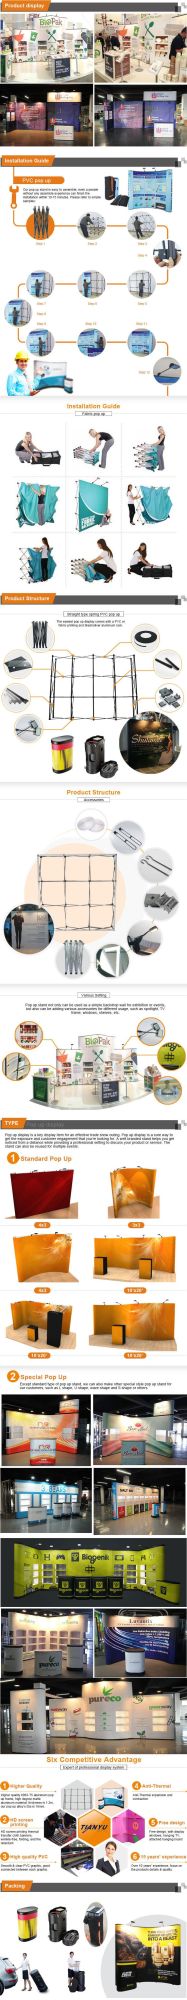 Aluminum Pop up Stand, Pop up Tower, Trade Show Display Stand